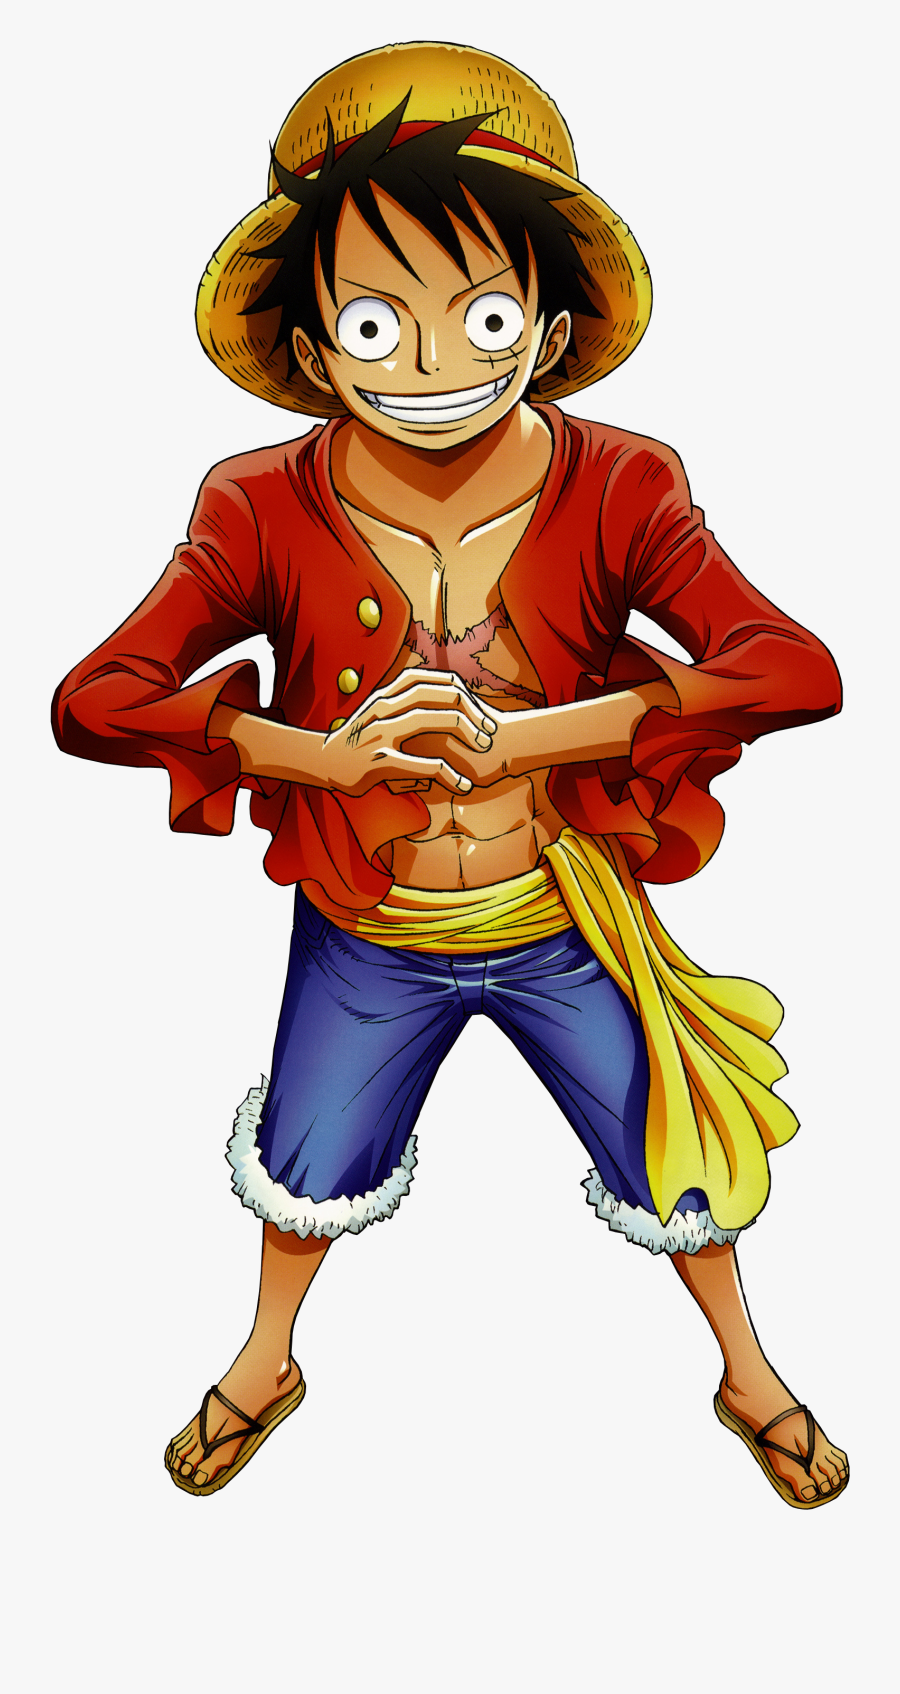 D Luffy Fictional Characters - One Piece Luffy Png, Transparent Clipart